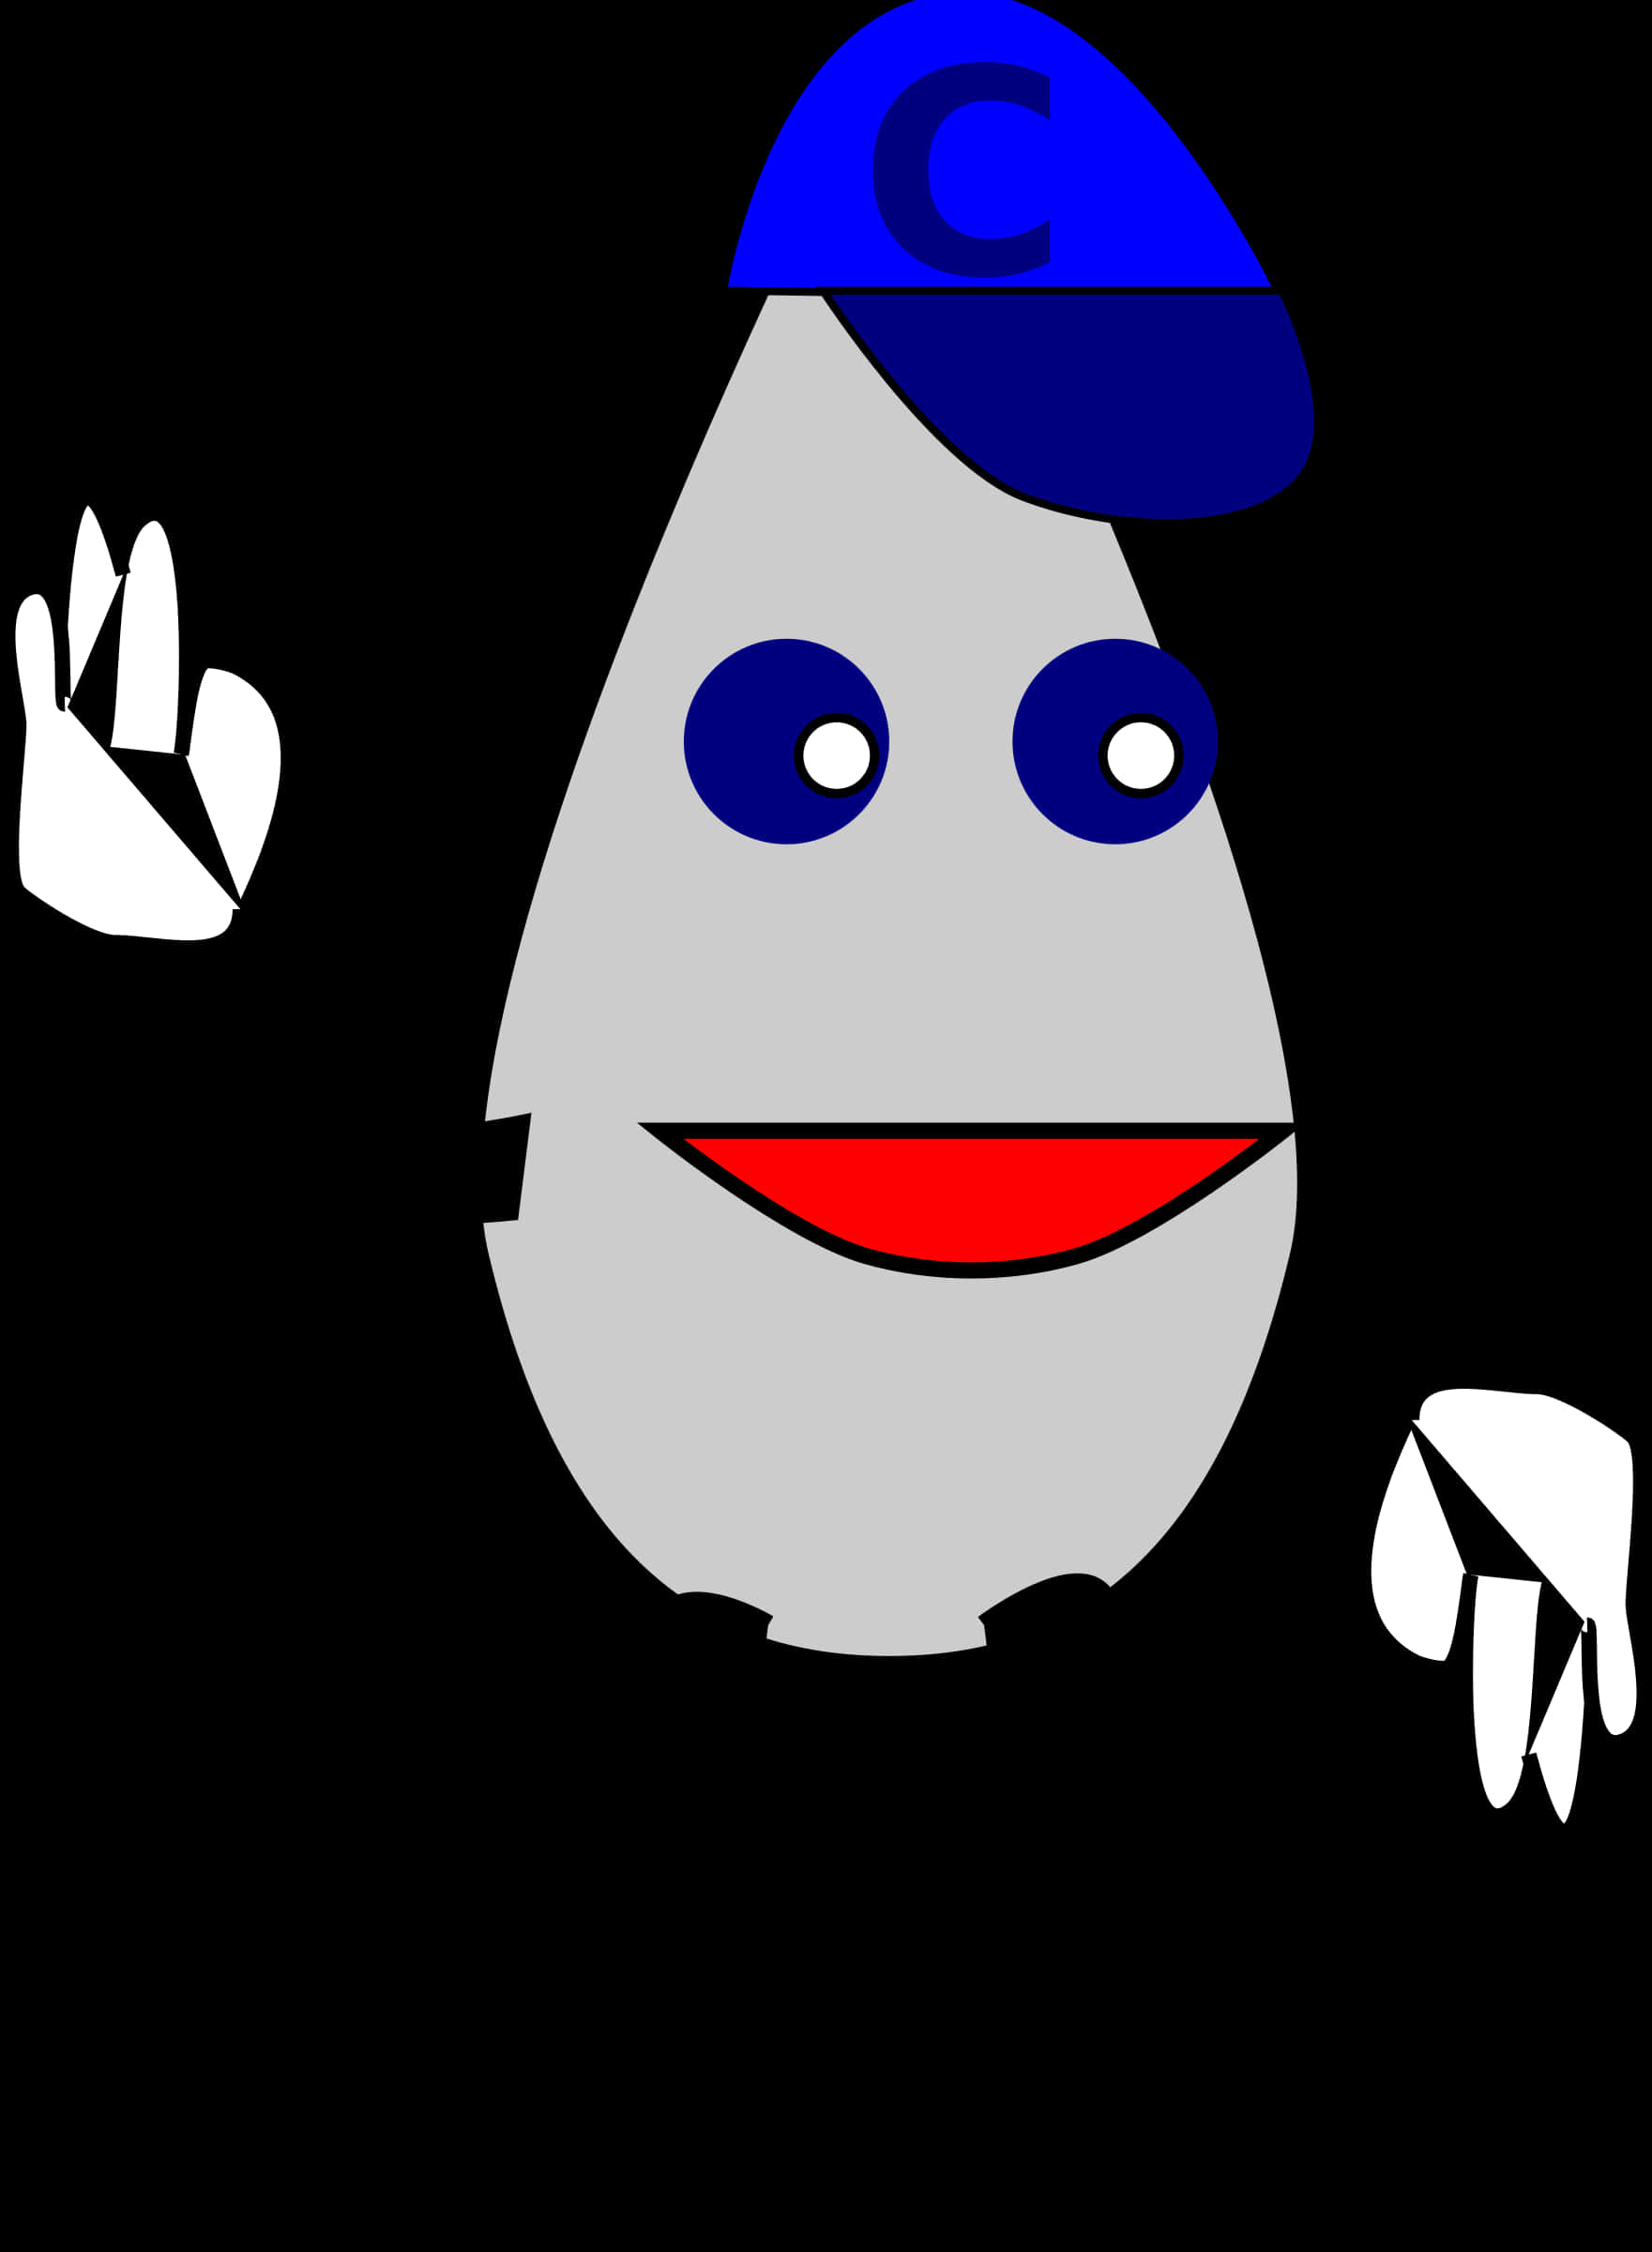 A Cartoon Character With A Blue Hat And Red Lips